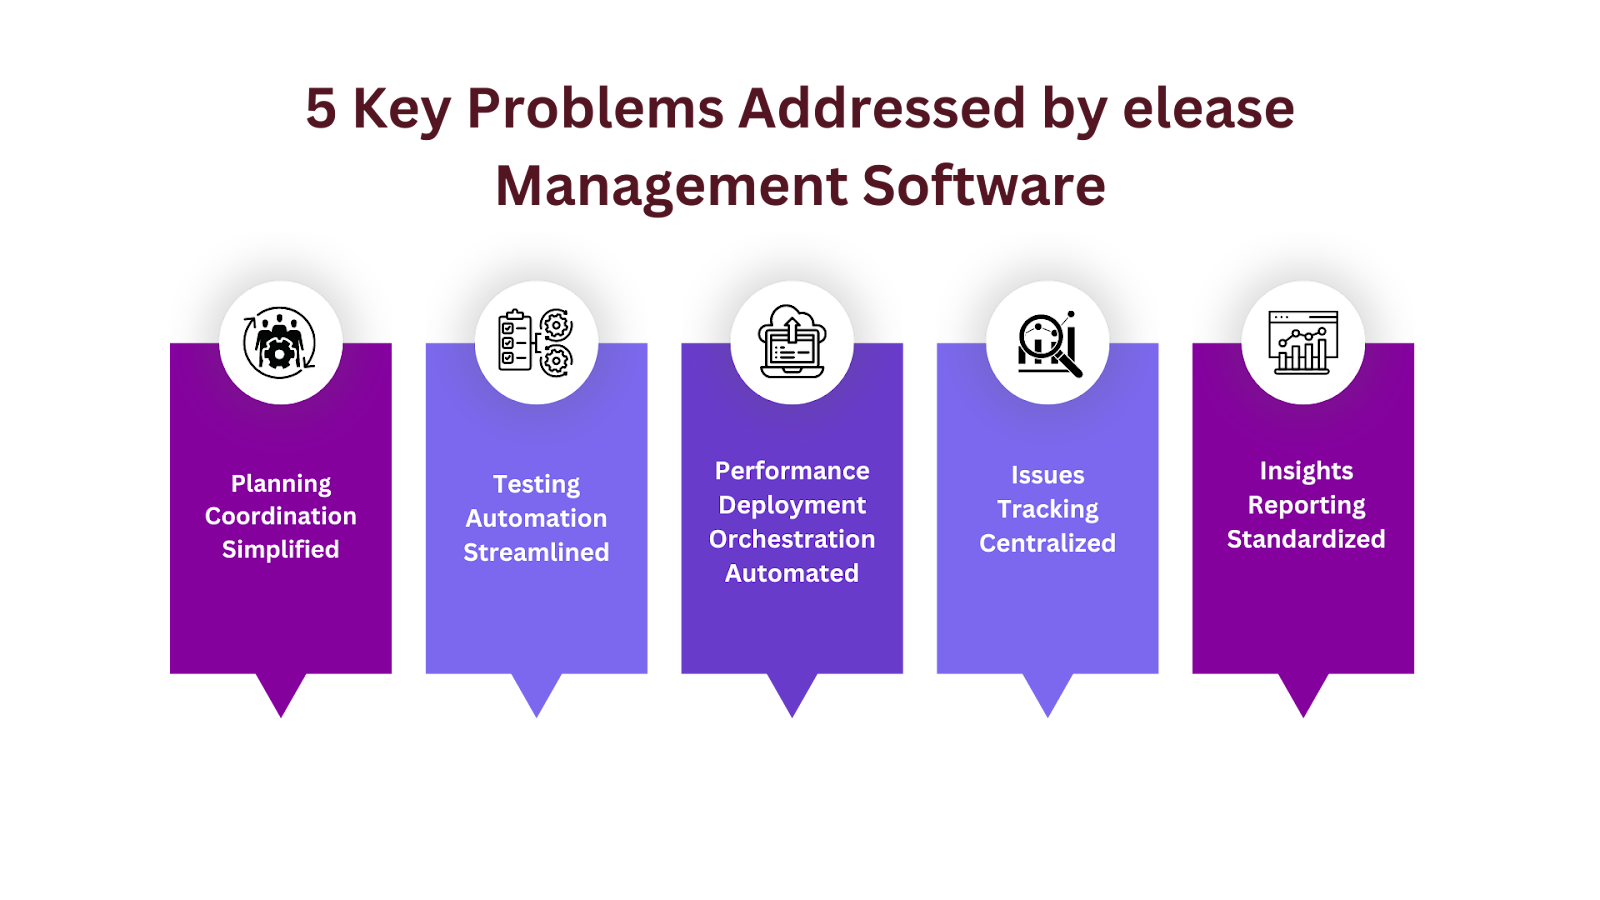 5 Key Problems Addressed by Release Management Software